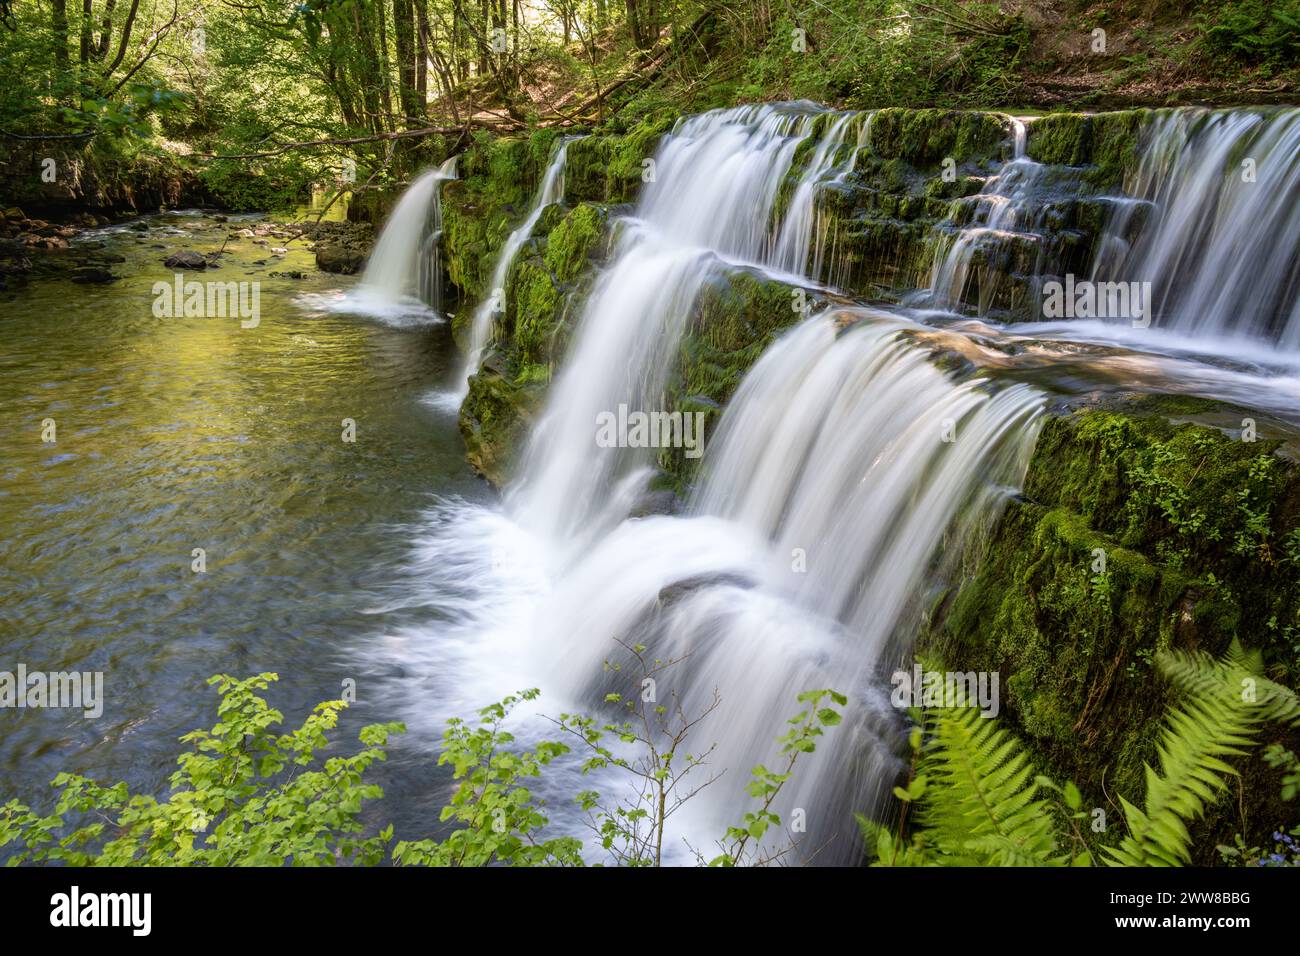 Sgwd y Pannwr, Waterfall, pays de Galles, Royaume-Uni Banque D'Images